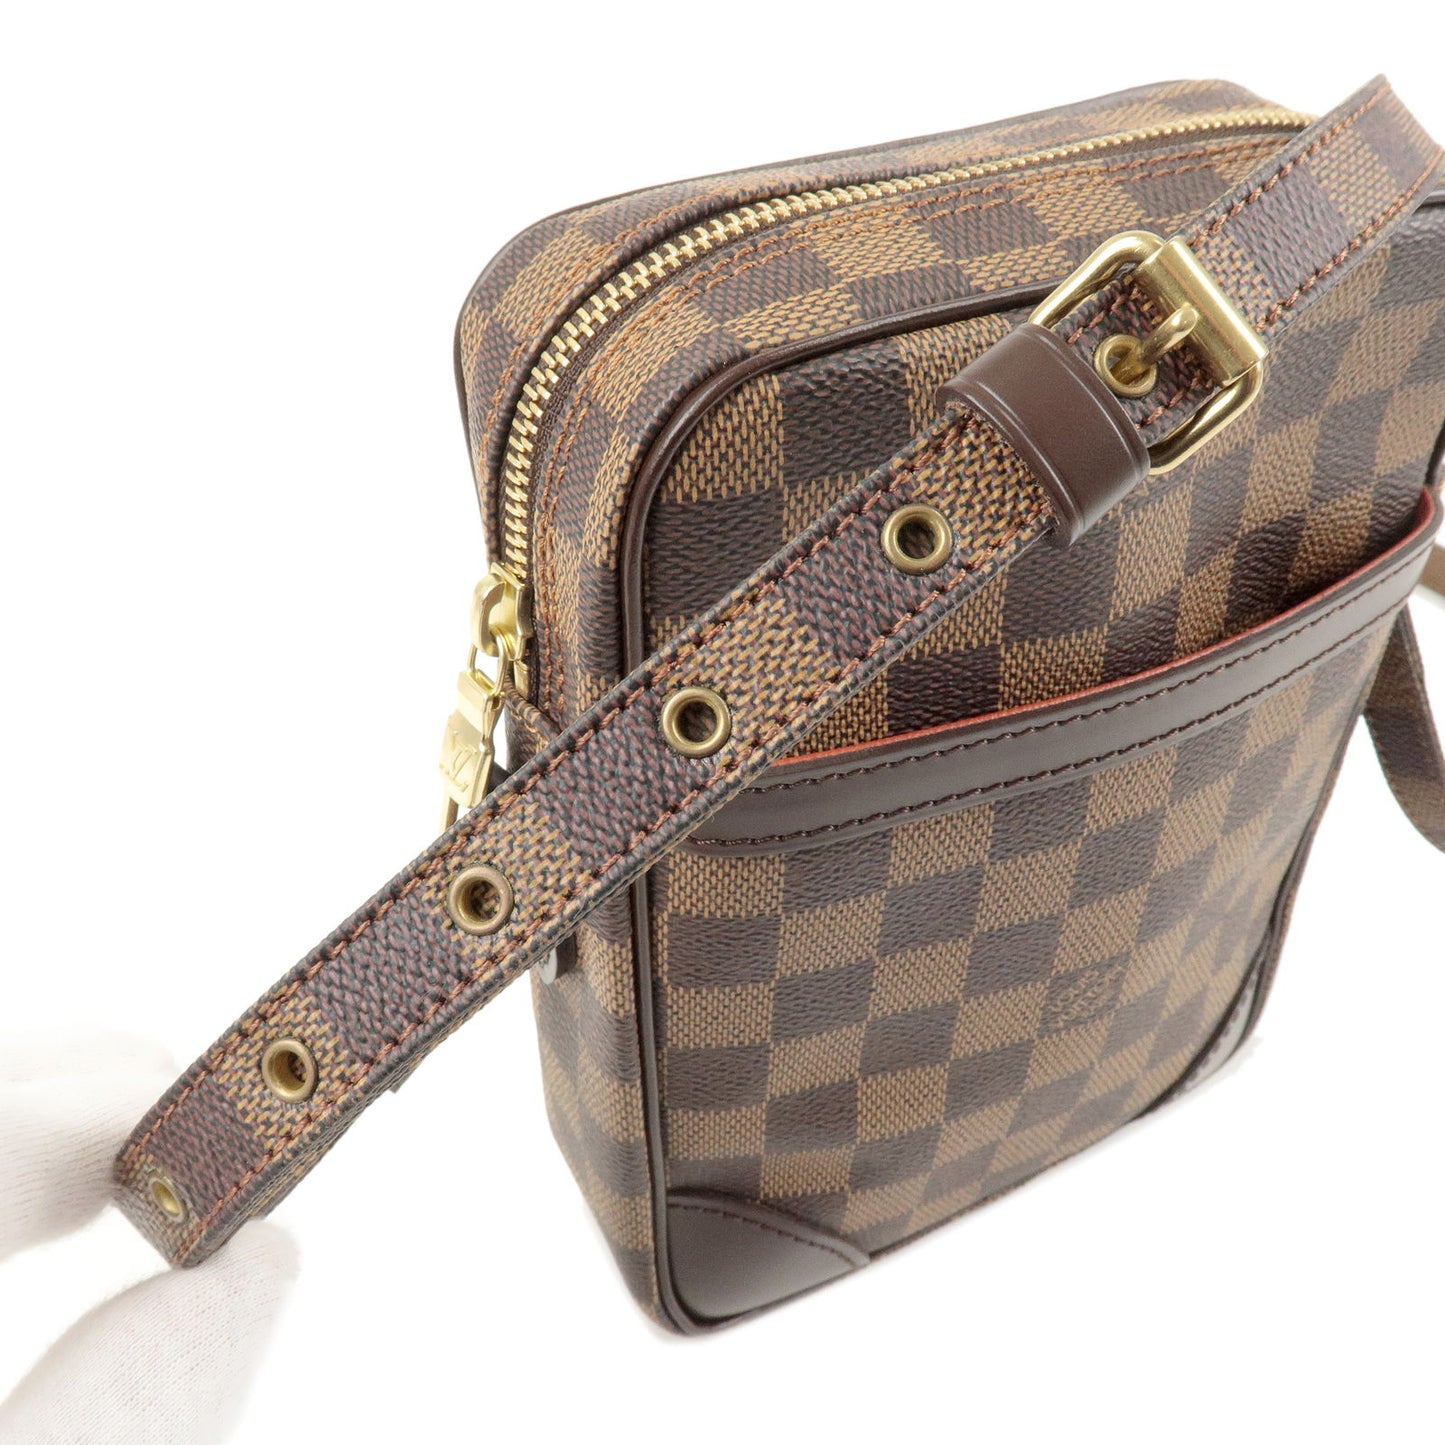 Authentic-Louis-Vuitton-Damier-Danube-Shoulder-Bag-Special-Order-N48061-Used-F/S